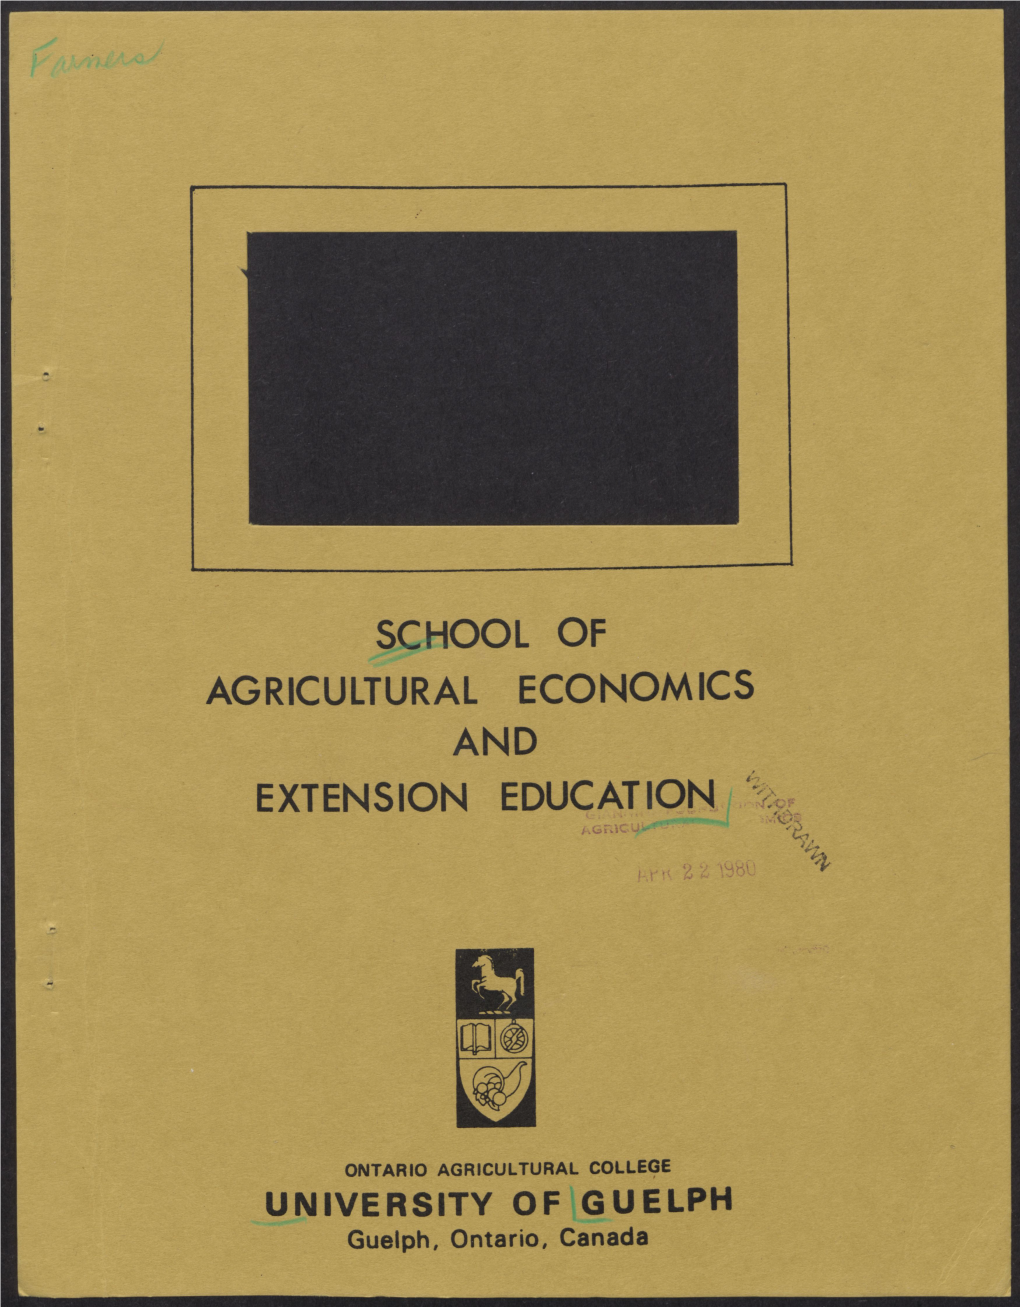 School of Agricultural Economics and Extension Education